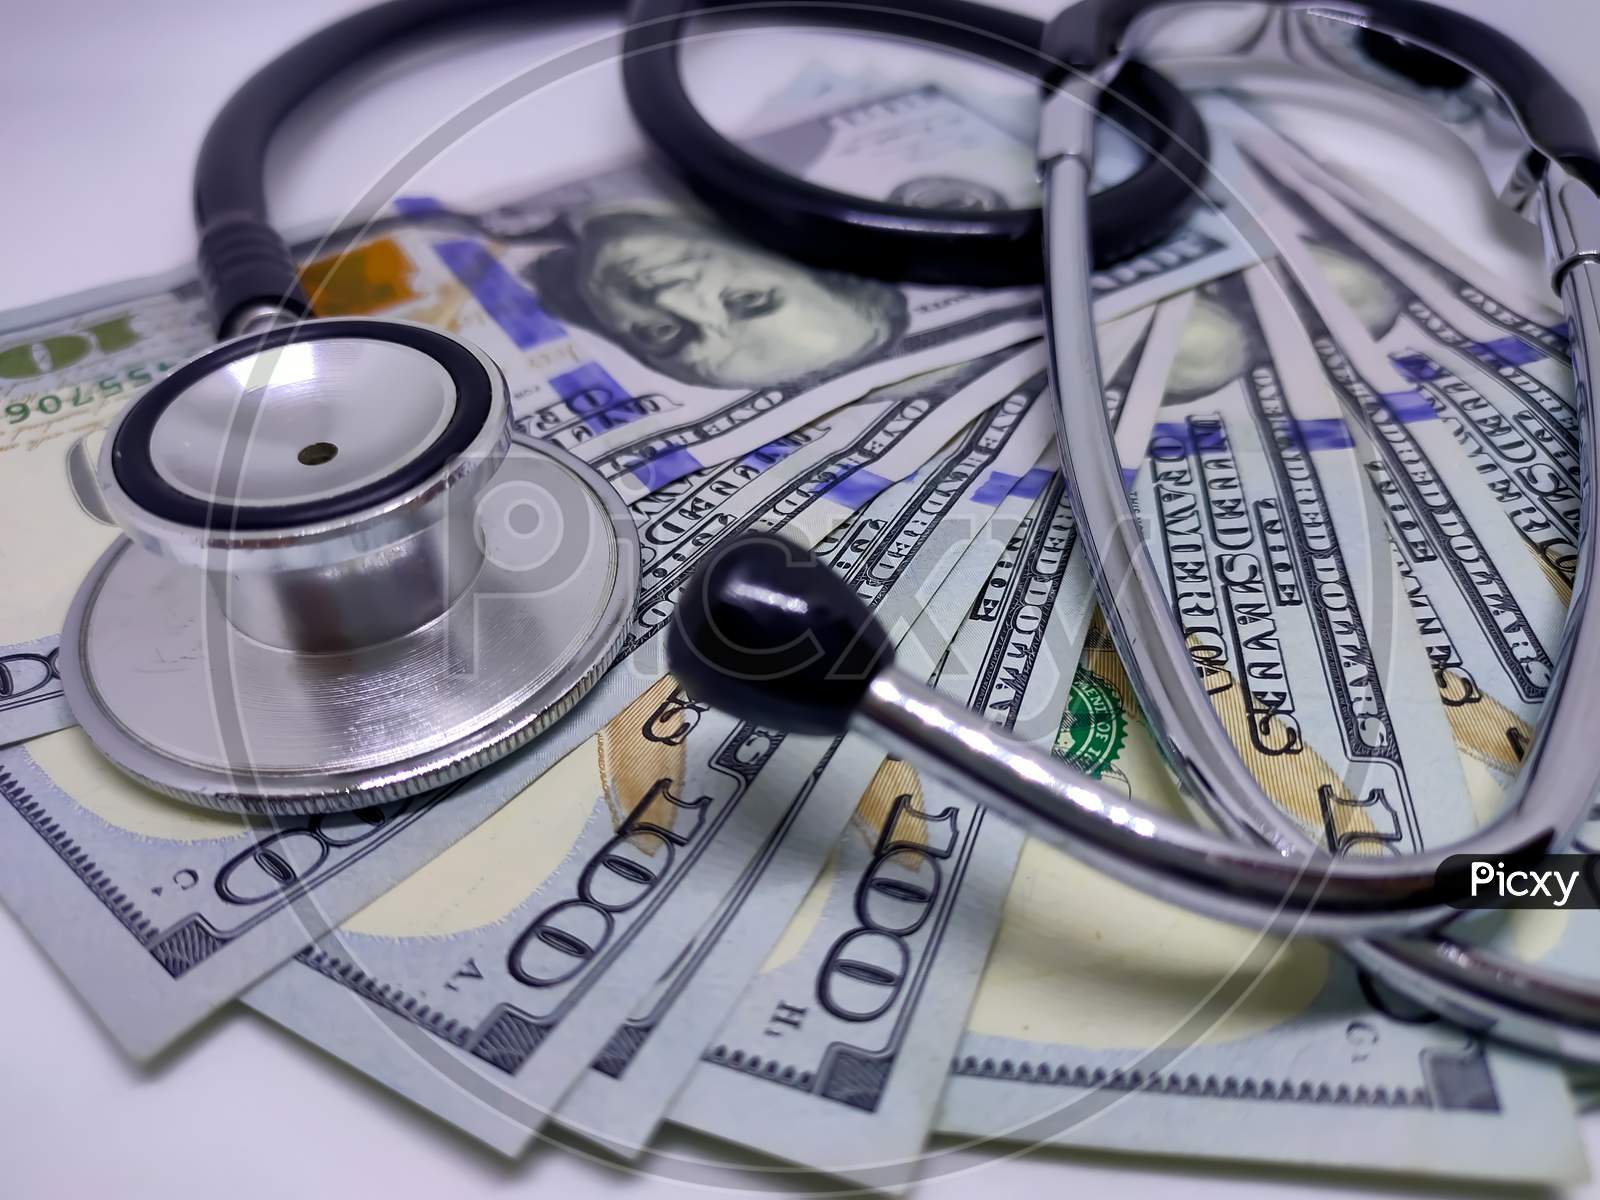 Stethoscope On The Background Of Us Dollar Bill. The Concept Of Paid Medicine. Medical Cost. Healthcare Payment System.